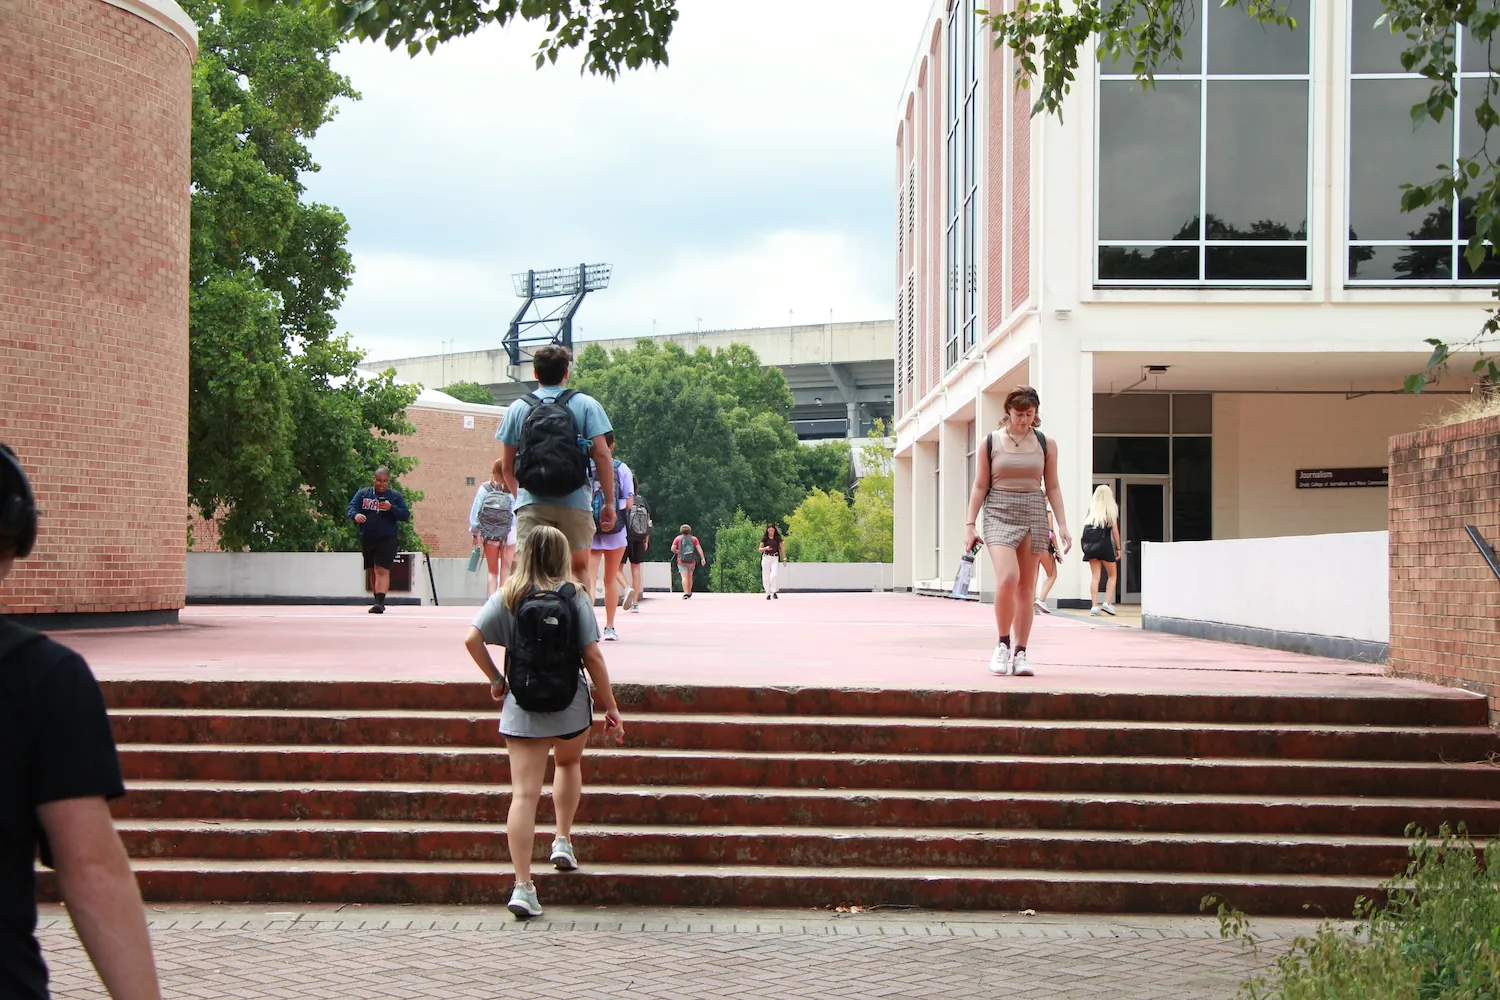 Students walk outside of Grady College during the first day of classes 2022.